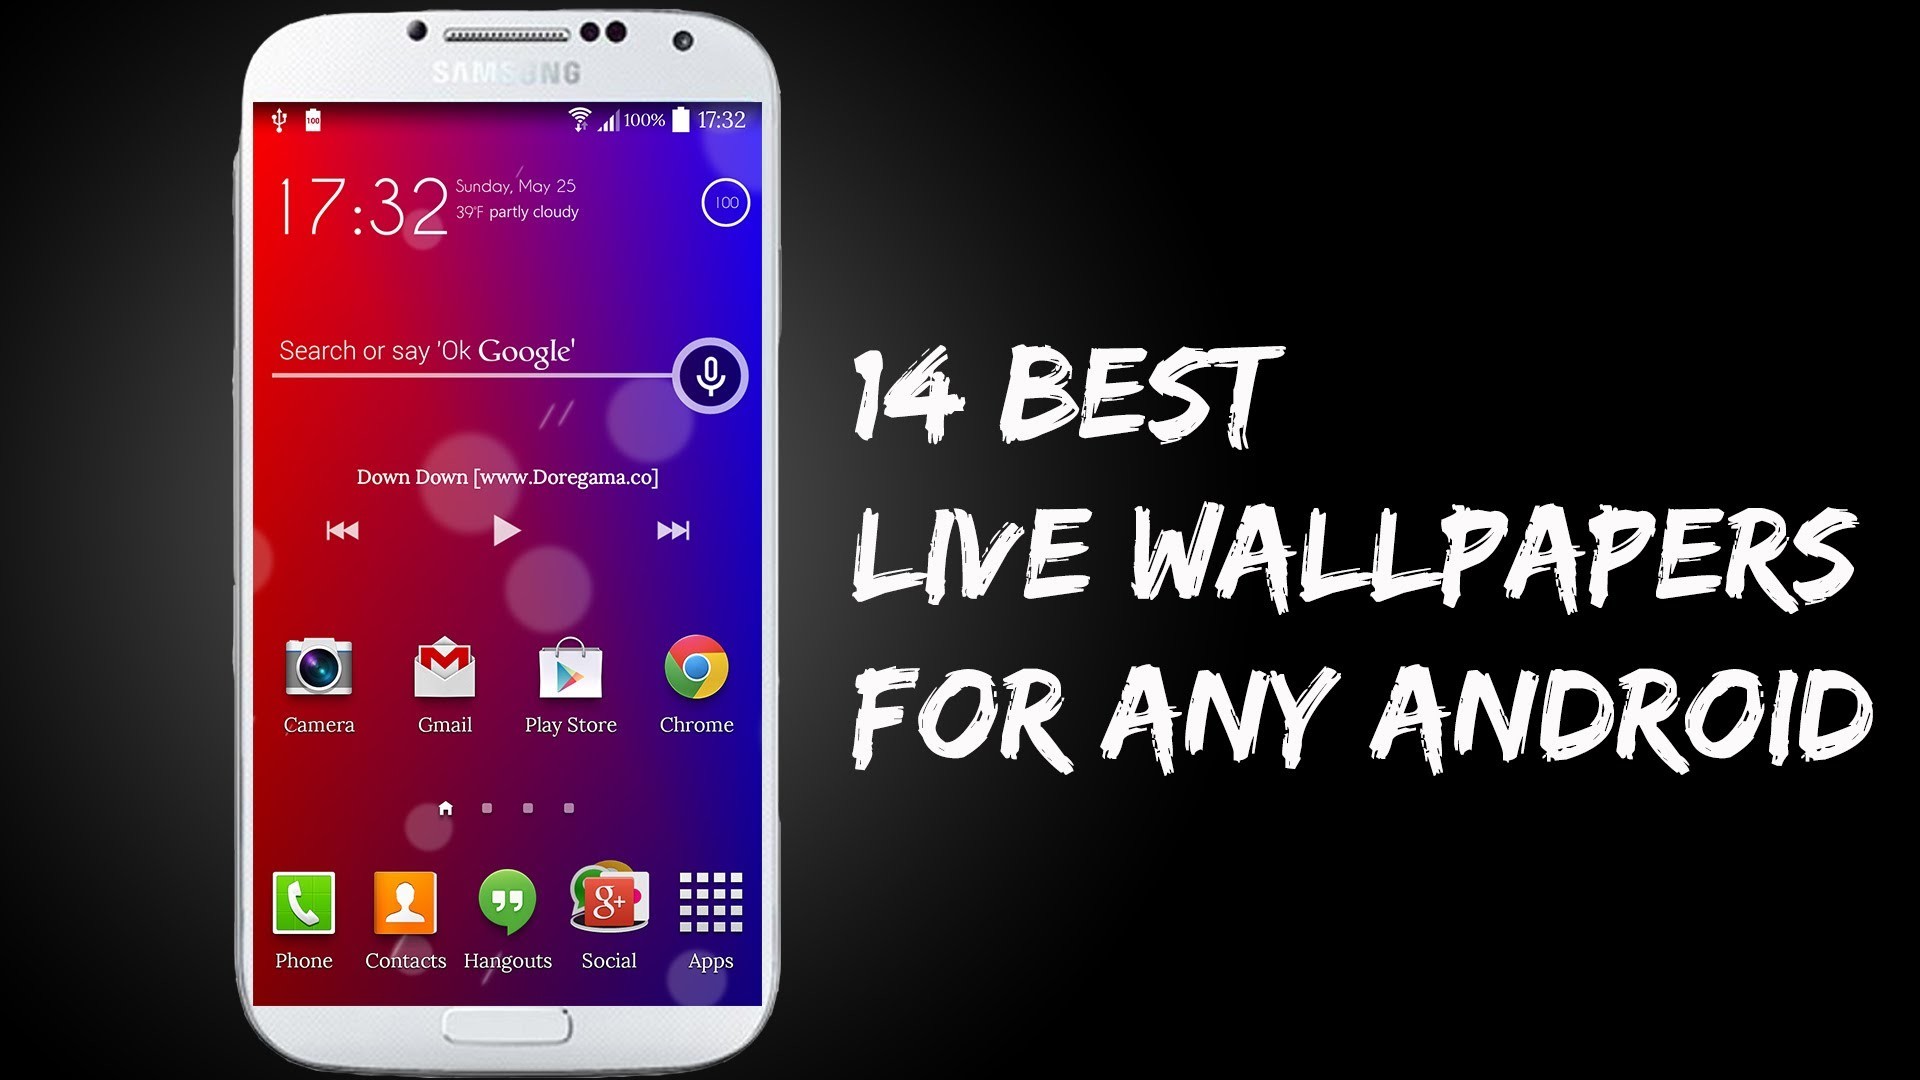 1920x1080 14 Best Live Wallpapers for any Android (Samsung galaxy s3,s4,s5,note3) -  YouTube